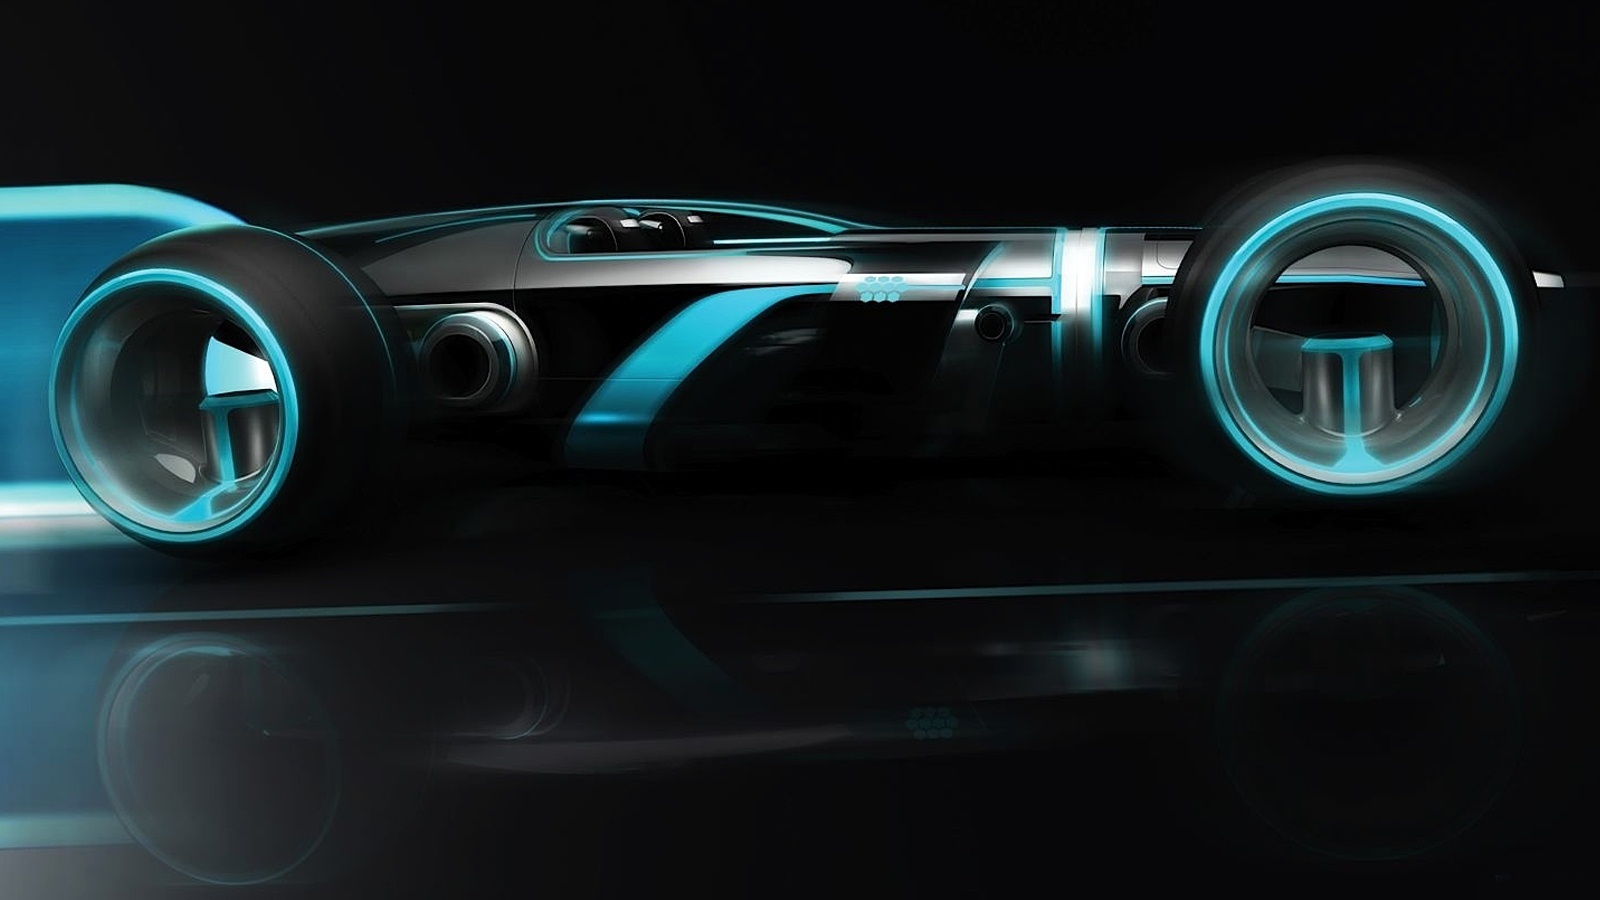 Tron Wallpapers Archives - Page 5 of 5 - Wallpaper